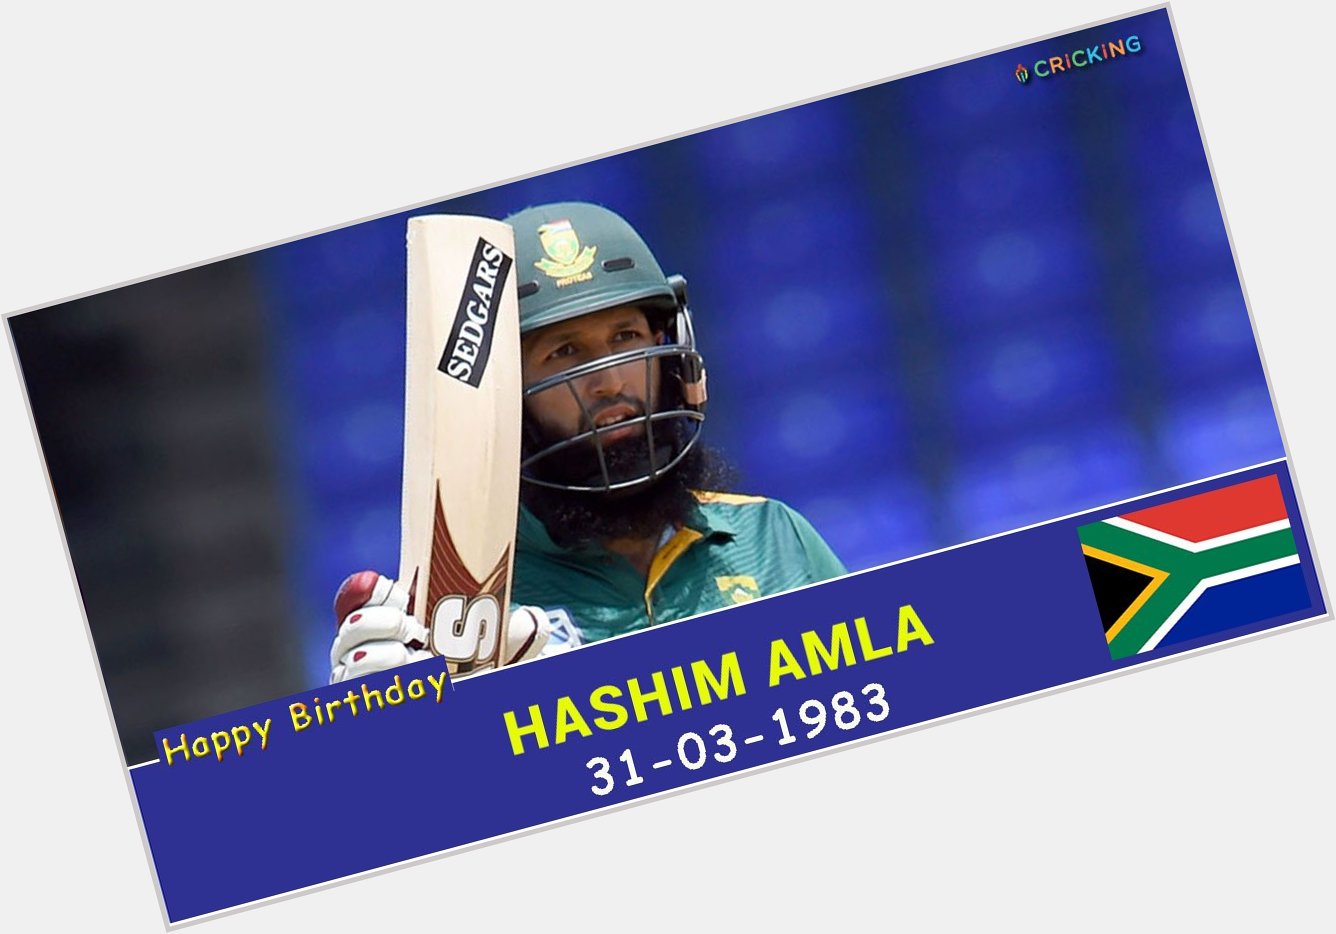 Happy Birthday Hashim Amla. The South African cricketer turns 34 today. 